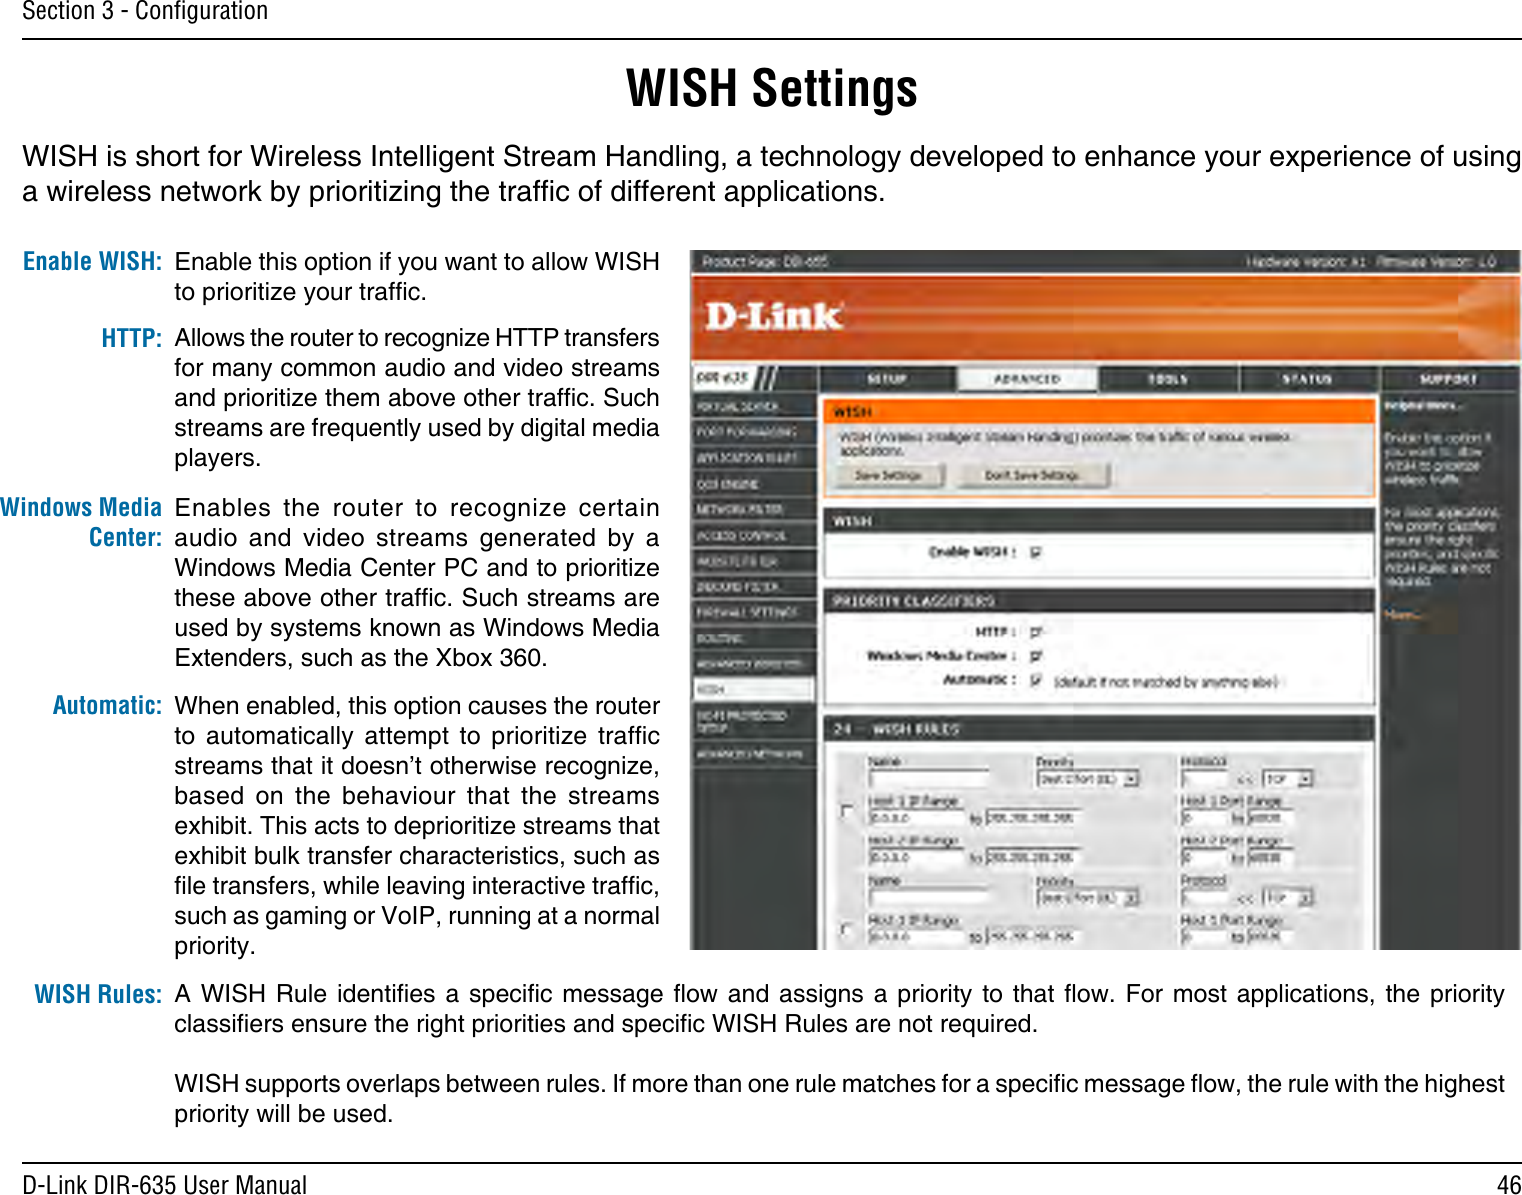 46D-Link DIR-635 User ManualSection 3 - ConﬁgurationWISH SettingsWISH is short for Wireless Intelligent Stream Handling, a technology developed to enhance your experience of using a wireless network by prioritizing the trafc of different applications. Enable this option if you want to allow WISH to prioritize your trafc. Enable WISH:Allows the router to recognize HTTP transfers for many common audio and video streams and prioritize them above other trafc. Such streams are frequently used by digital media players. HTTP:Enables  the  router  to  recognize  certain audio  and  video  streams  generated  by  a Windows Media Center PC and to prioritize these above other trafc. Such streams are used by systems known as Windows Media Extenders, such as the Xbox 360. Windows Media Center:When enabled, this option causes the router to  automatically  attempt  to  prioritize  trafc streams that it doesn’t otherwise recognize, based  on  the  behaviour  that  the  streams exhibit. This acts to deprioritize streams that exhibit bulk transfer characteristics, such as le transfers, while leaving interactive trafc, such as gaming or VoIP, running at a normal priority. Automatic:WISH Rules: A WISH Rule identies a  specic  message  ow  and  assigns  a  priority  to that ow. For most applications, the priority classiers ensure the right priorities and specic WISH Rules are not required. WISH supports overlaps between rules. If more than one rule matches for a specic message ow, the rule with the highest priority will be used. 